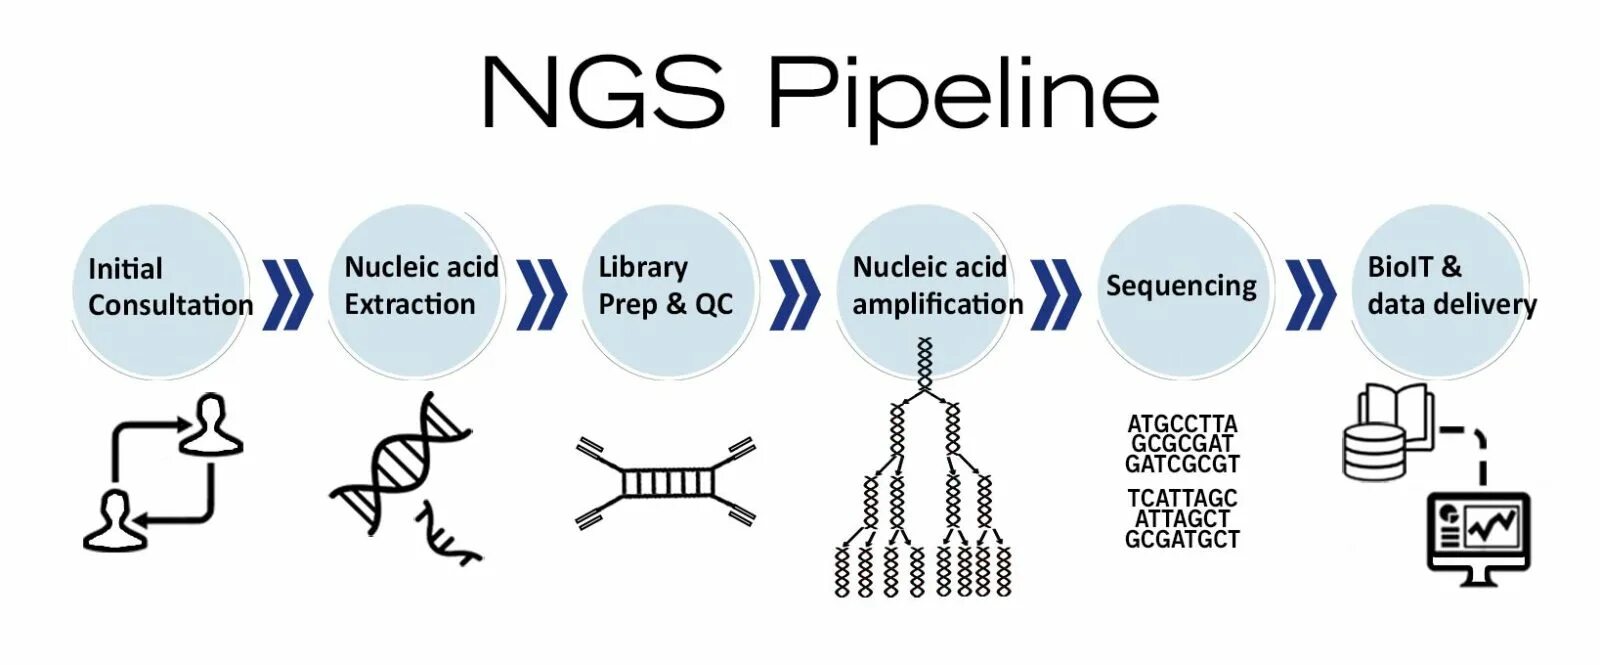 Ngs. Анализ NGS. NGS- данные. NGS (next Generation sequencing). NGS секвенирование.